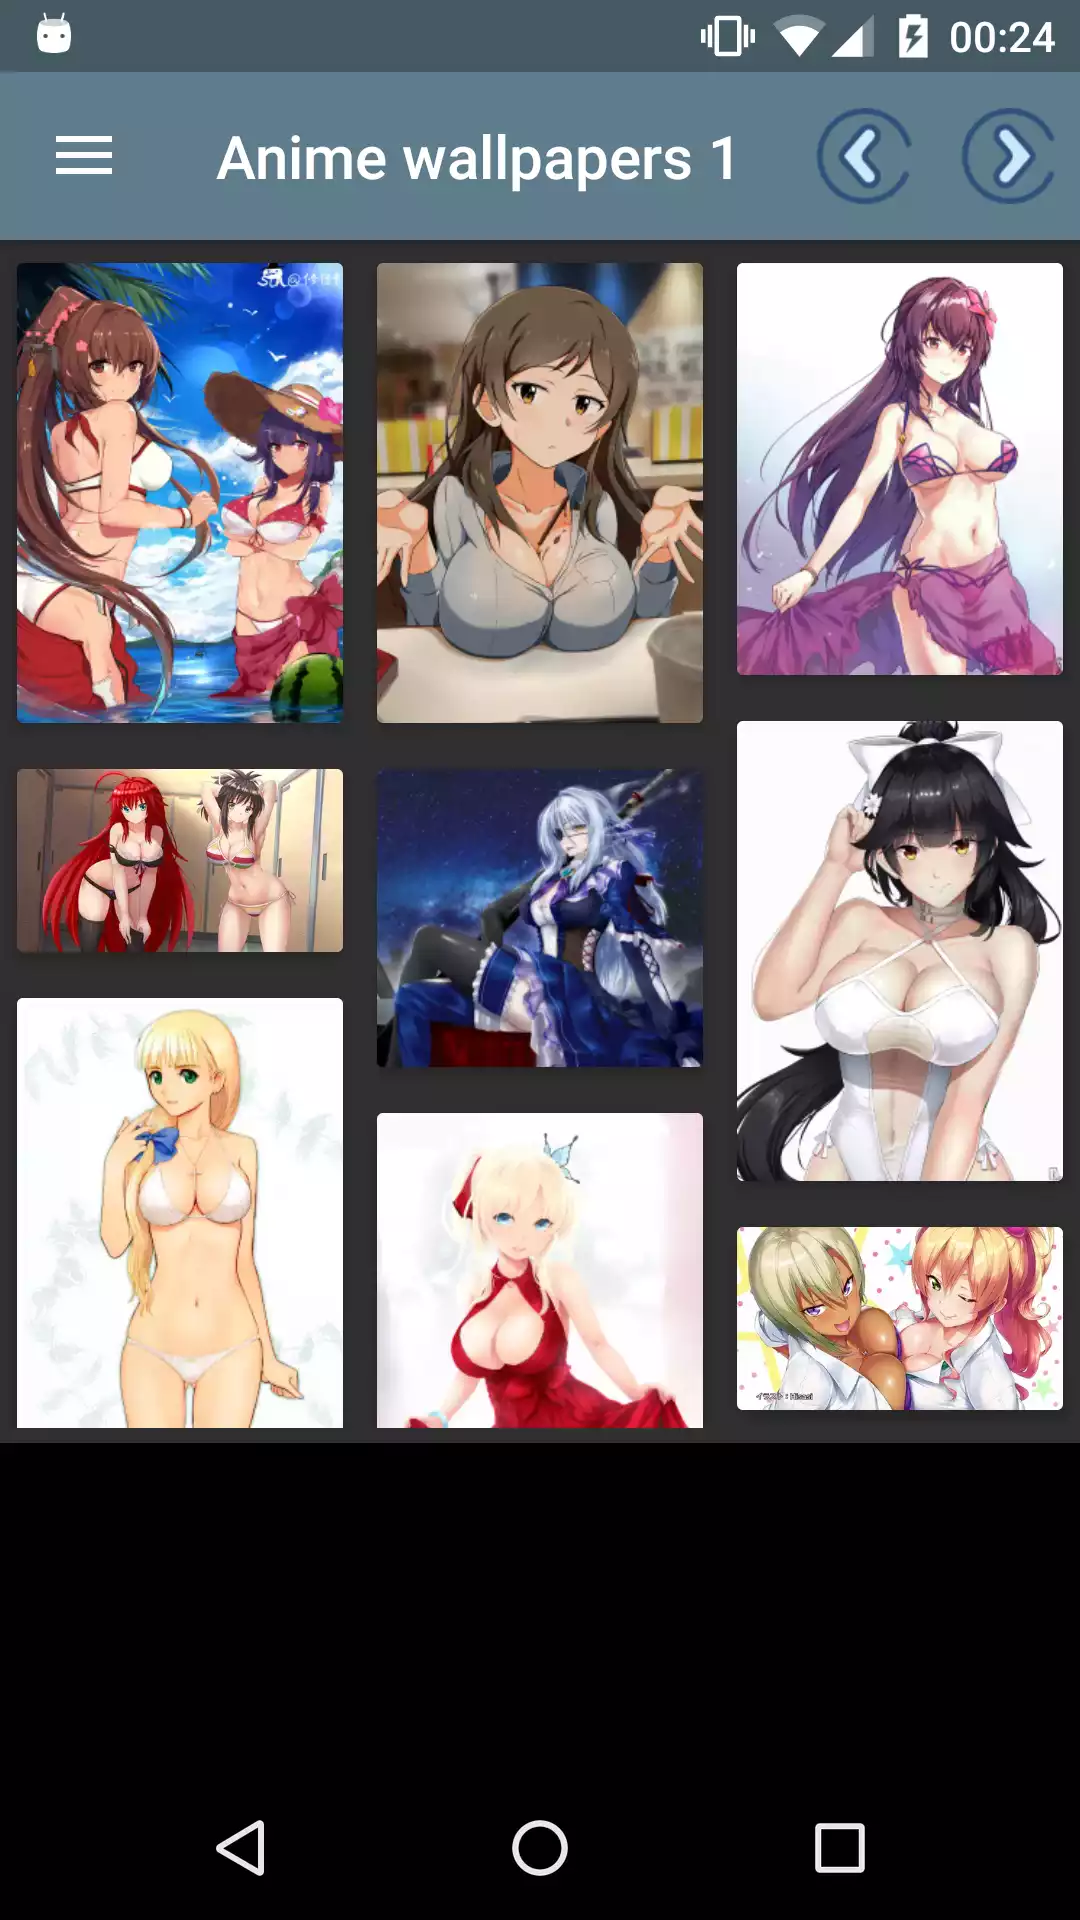 Sexy Anime Wallpapers drawings,mod,tuesday,android,japan,download,puzzles,photos,panties,apk,hot,images,sexy,porn,mobile,app,picture,wallpapers,and,hentai,titty,henti,adult,asian,apps,anime